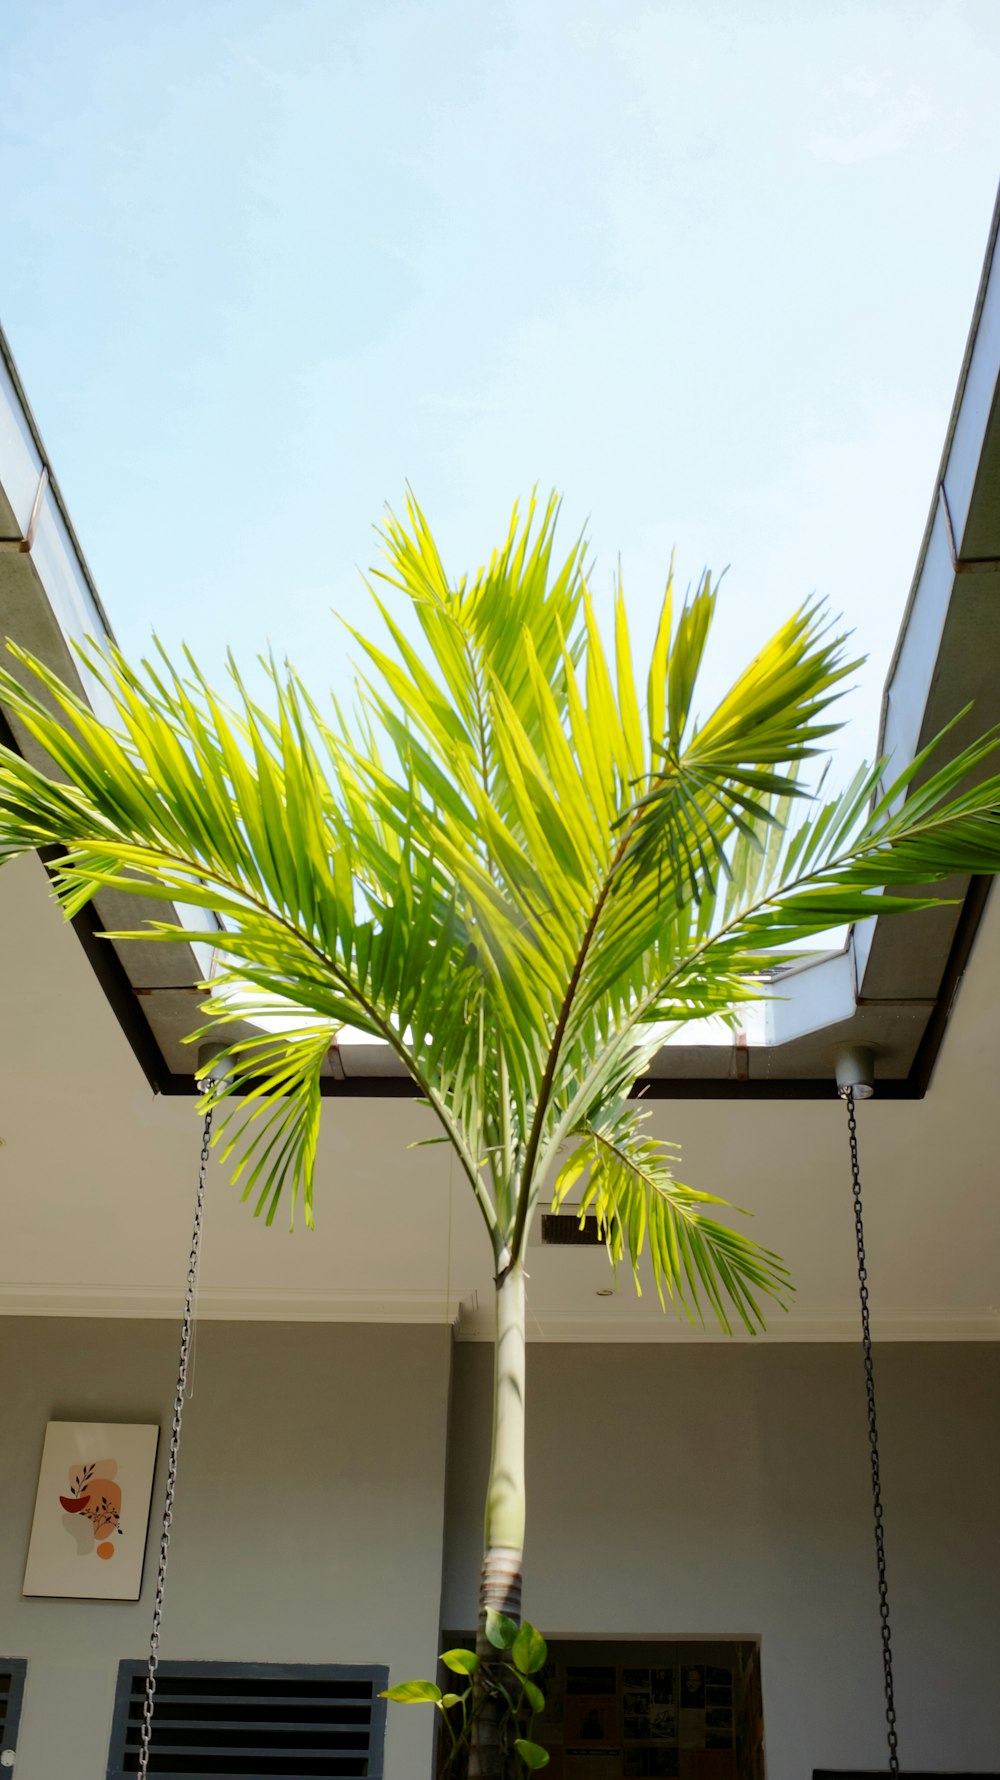 a palm tree in a hanging planter in front of a house